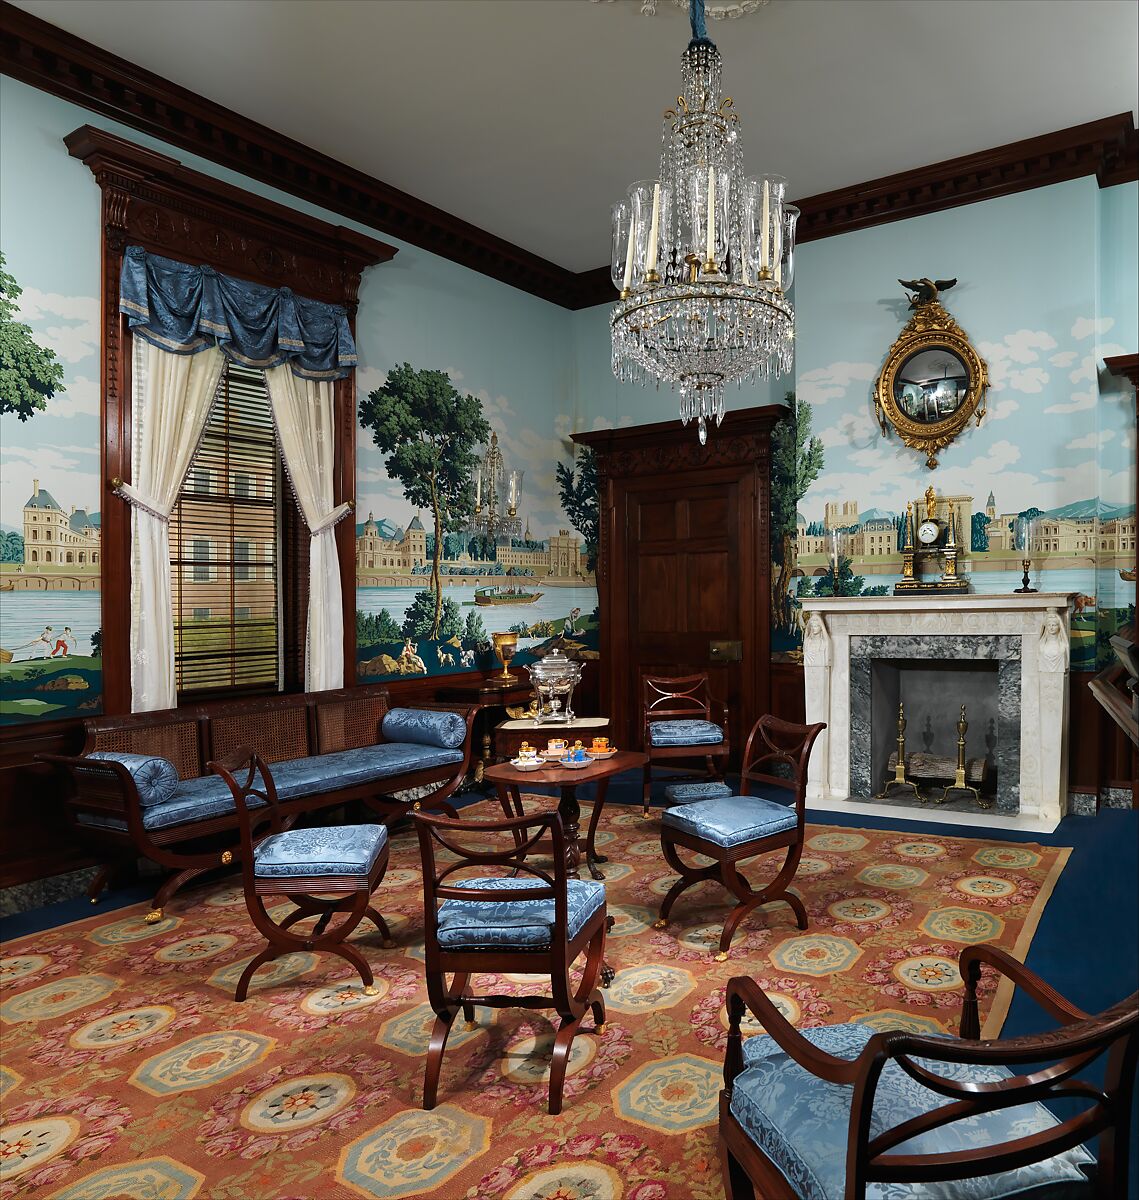 Parlor from the William C. Williams House